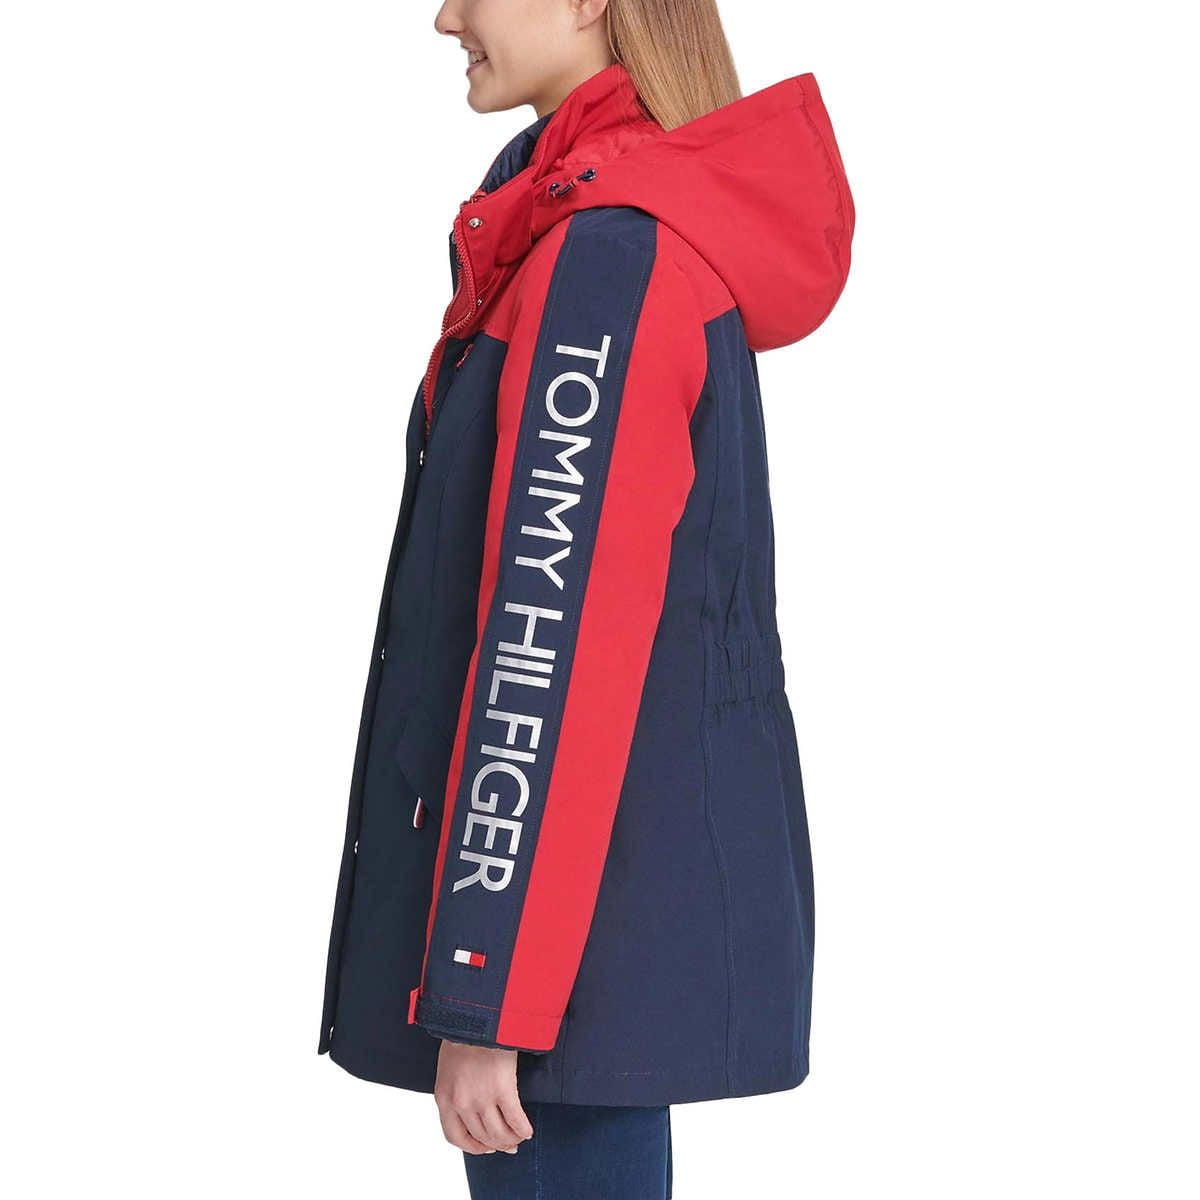 ven pris mytologi Tommy Hilfiger Womens 3 in 1 Winter Cold Weather Water Resistant Coat Red  Navy M - Walmart.com